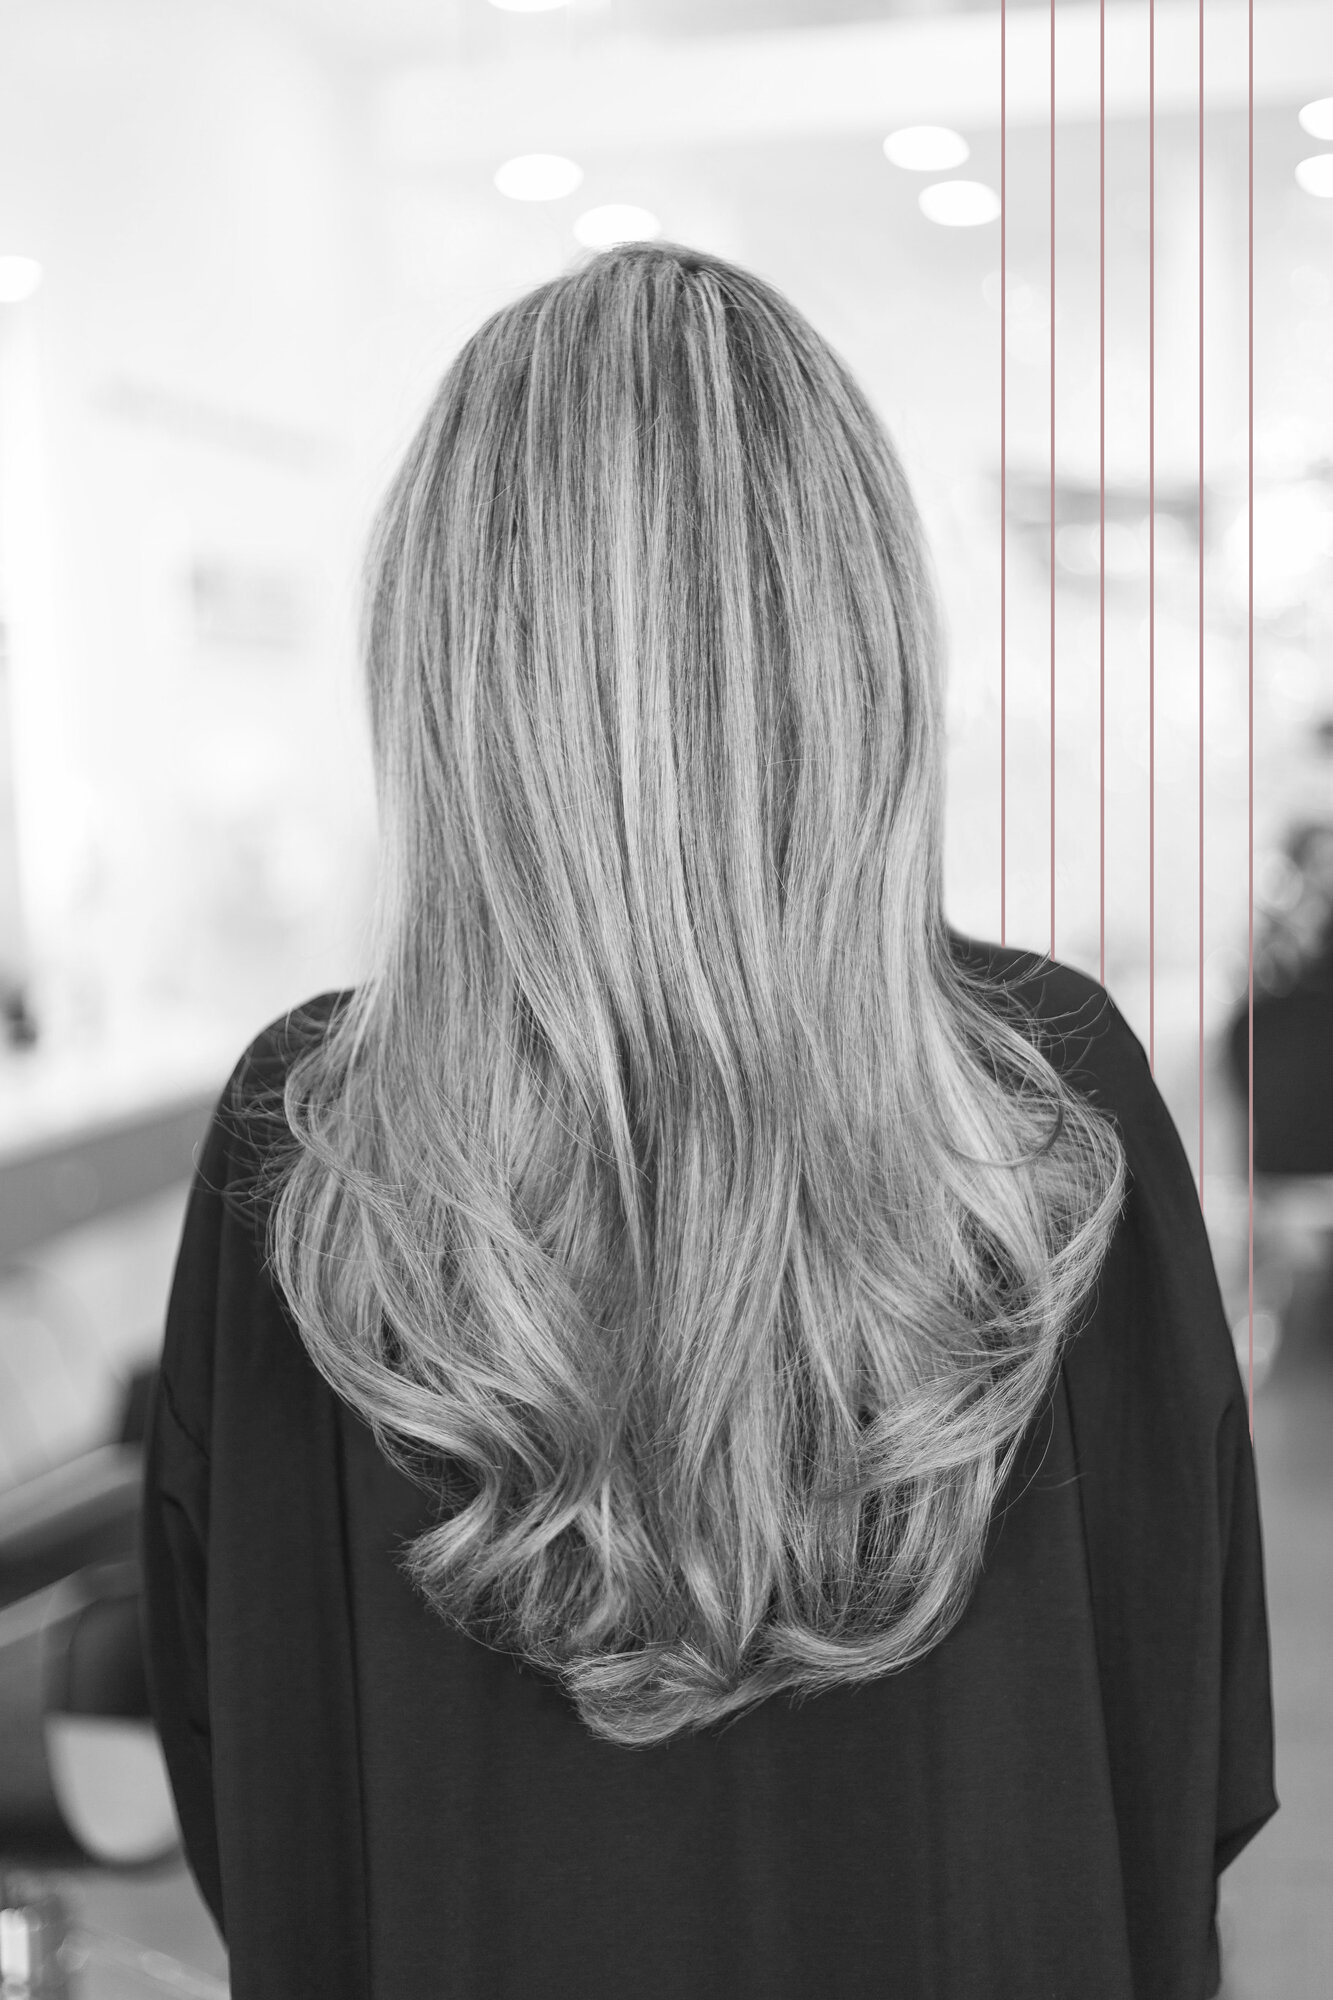 Crush on your hair. Crush Hair Co. is a full-service hair salon located in  Surrey, BC.